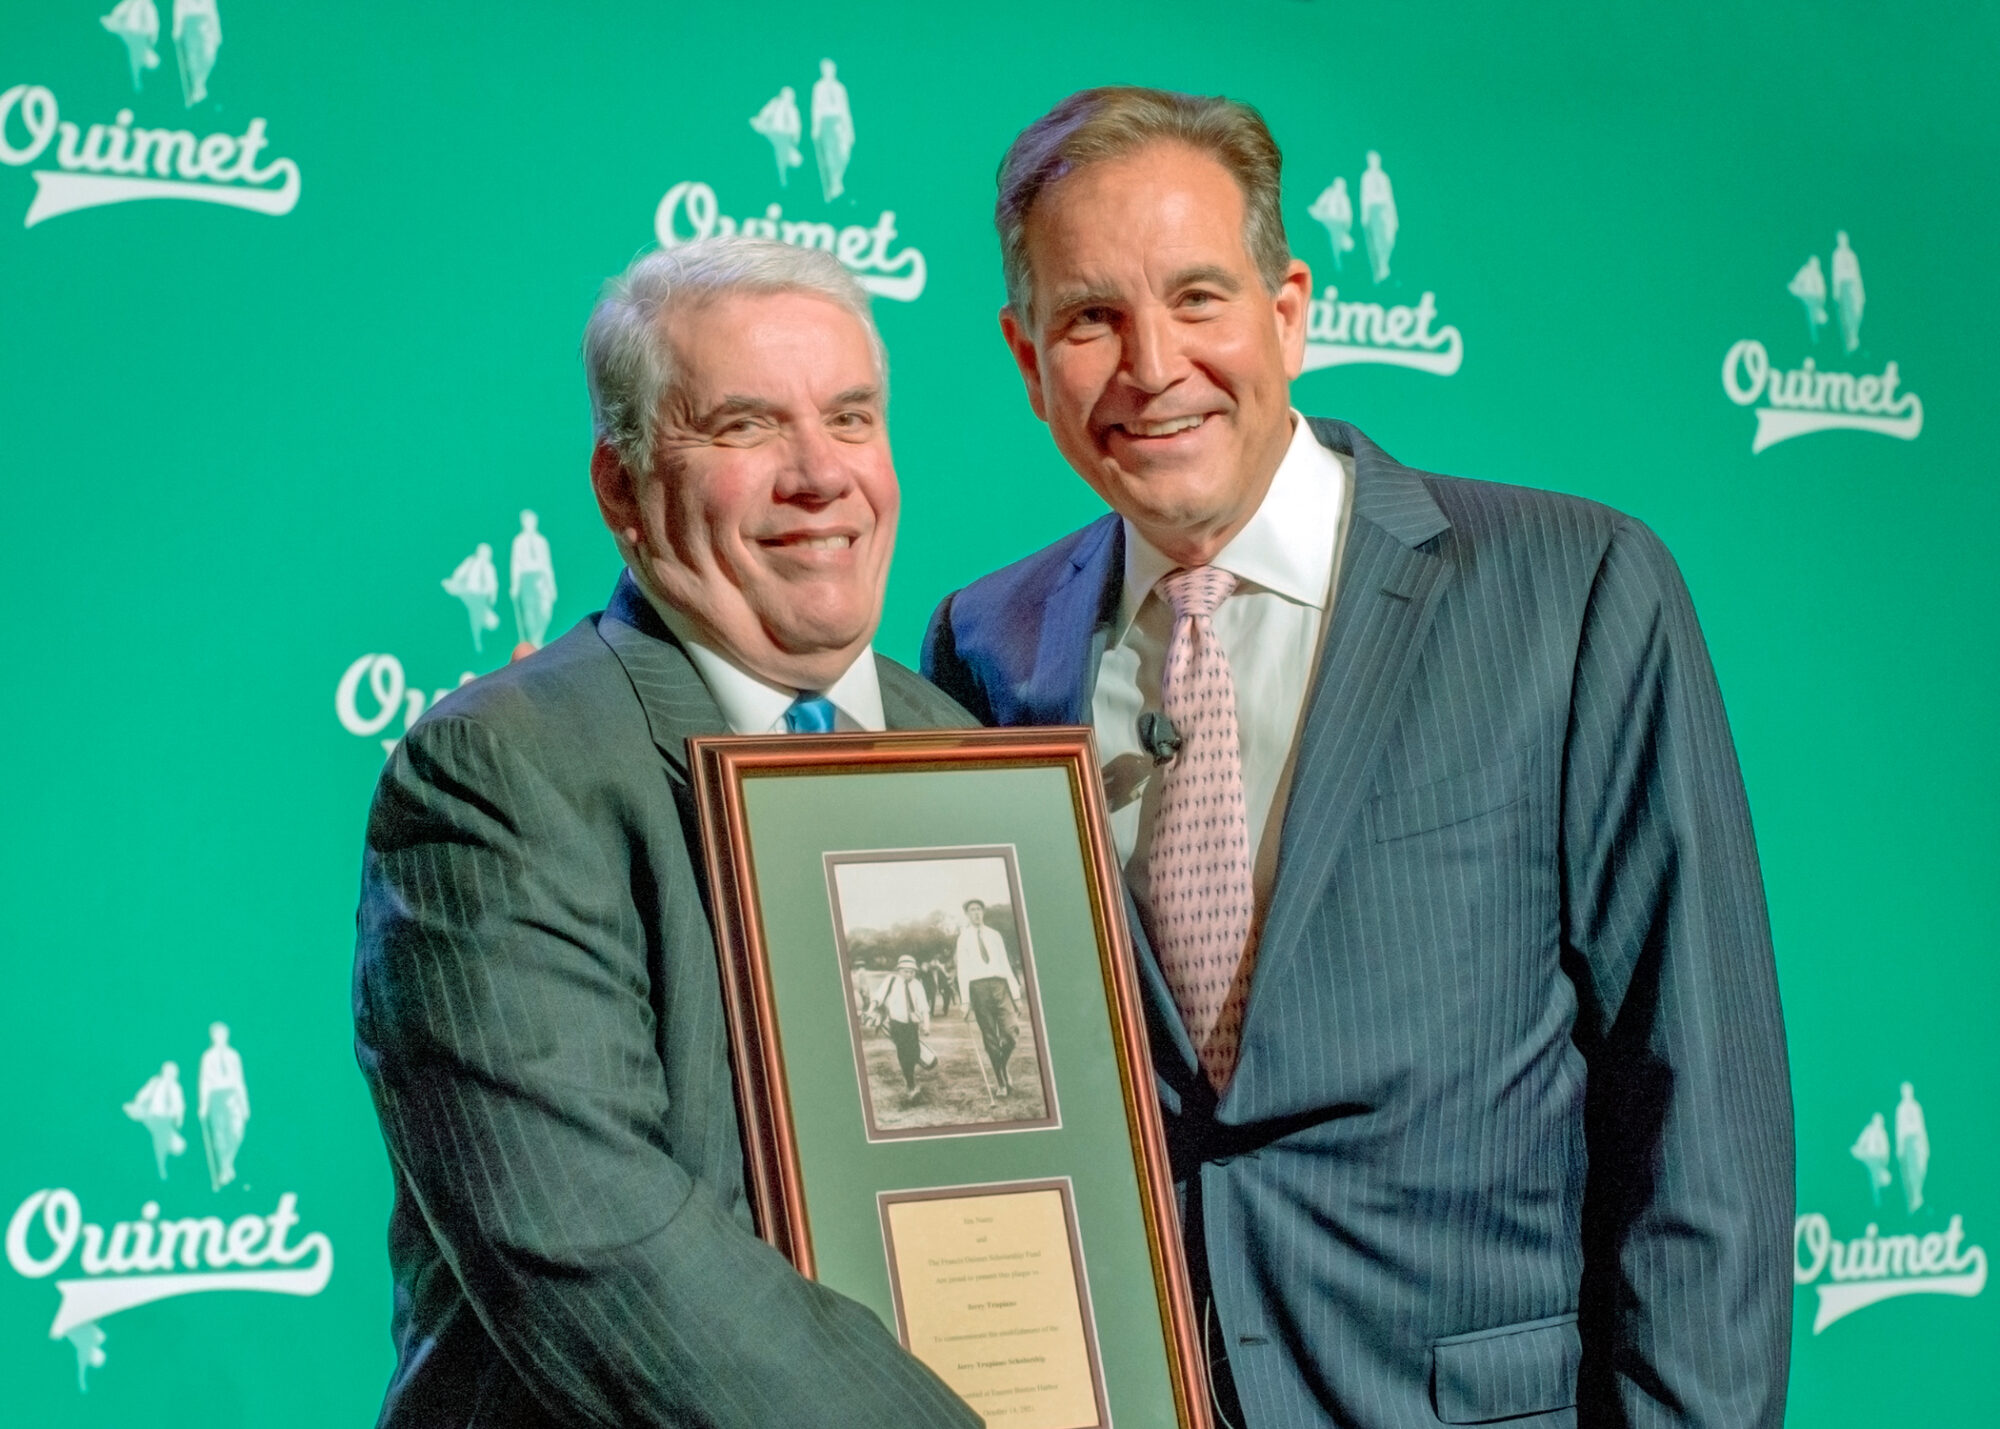 READ ABOUT JIM NANTZ’S TOUCHING TRIBUTE TO HIS MENTOR, JERRY TRUPIANO IN POWER FADES